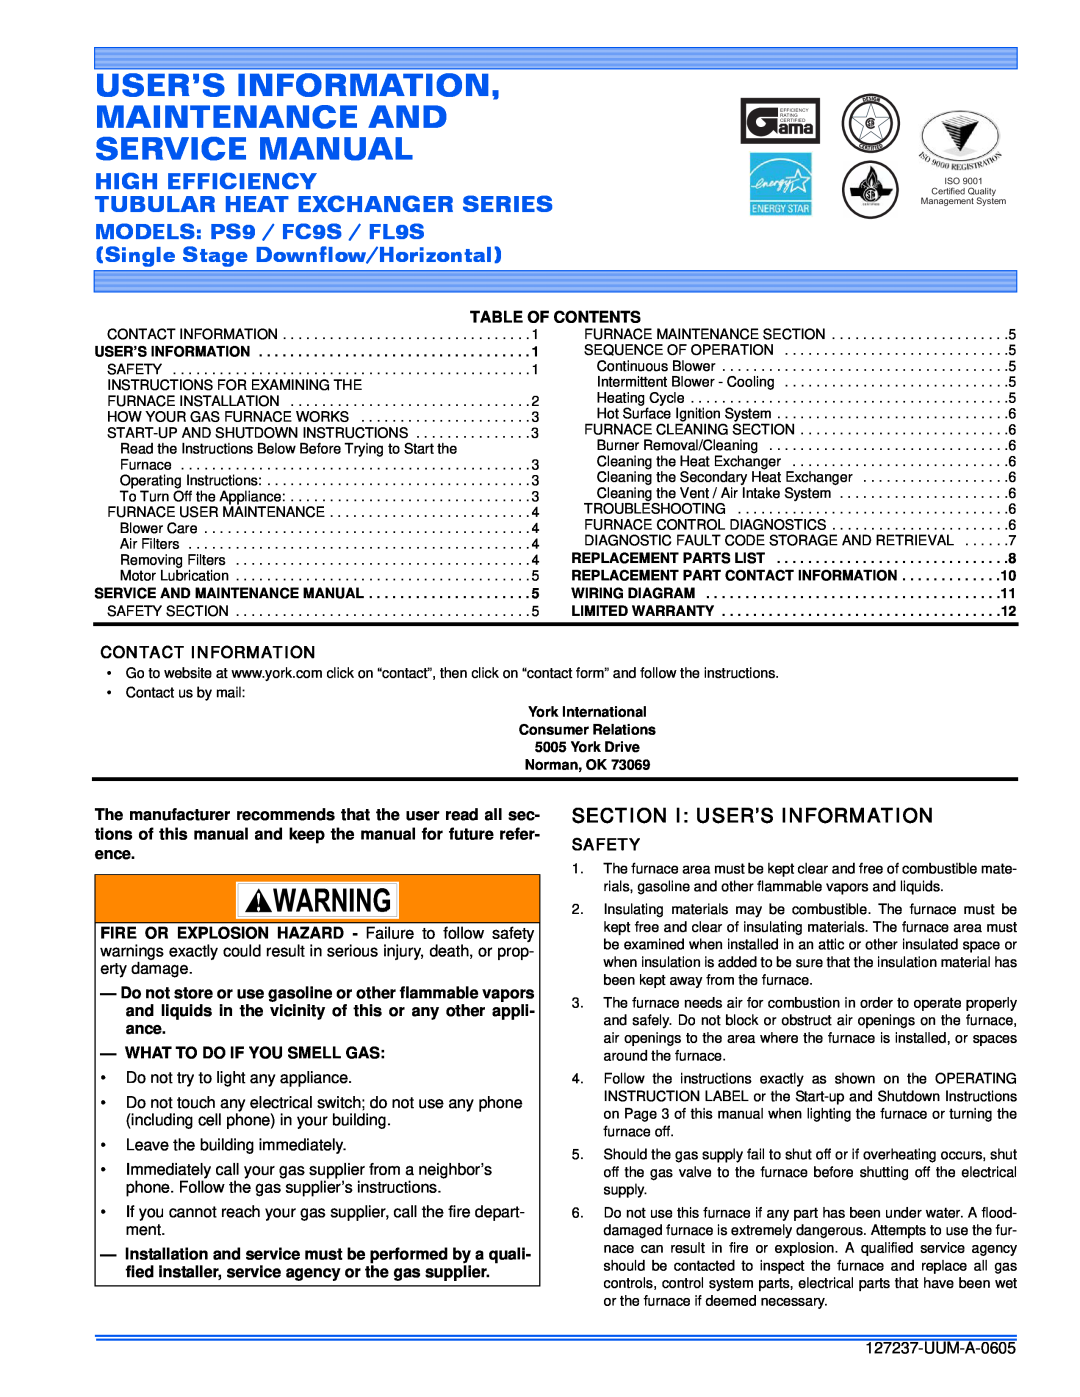 White Rodgers FL9S, PS9, FC9S service manual Section I User’S Information, Table Of Contents, Contact Information, Safety 